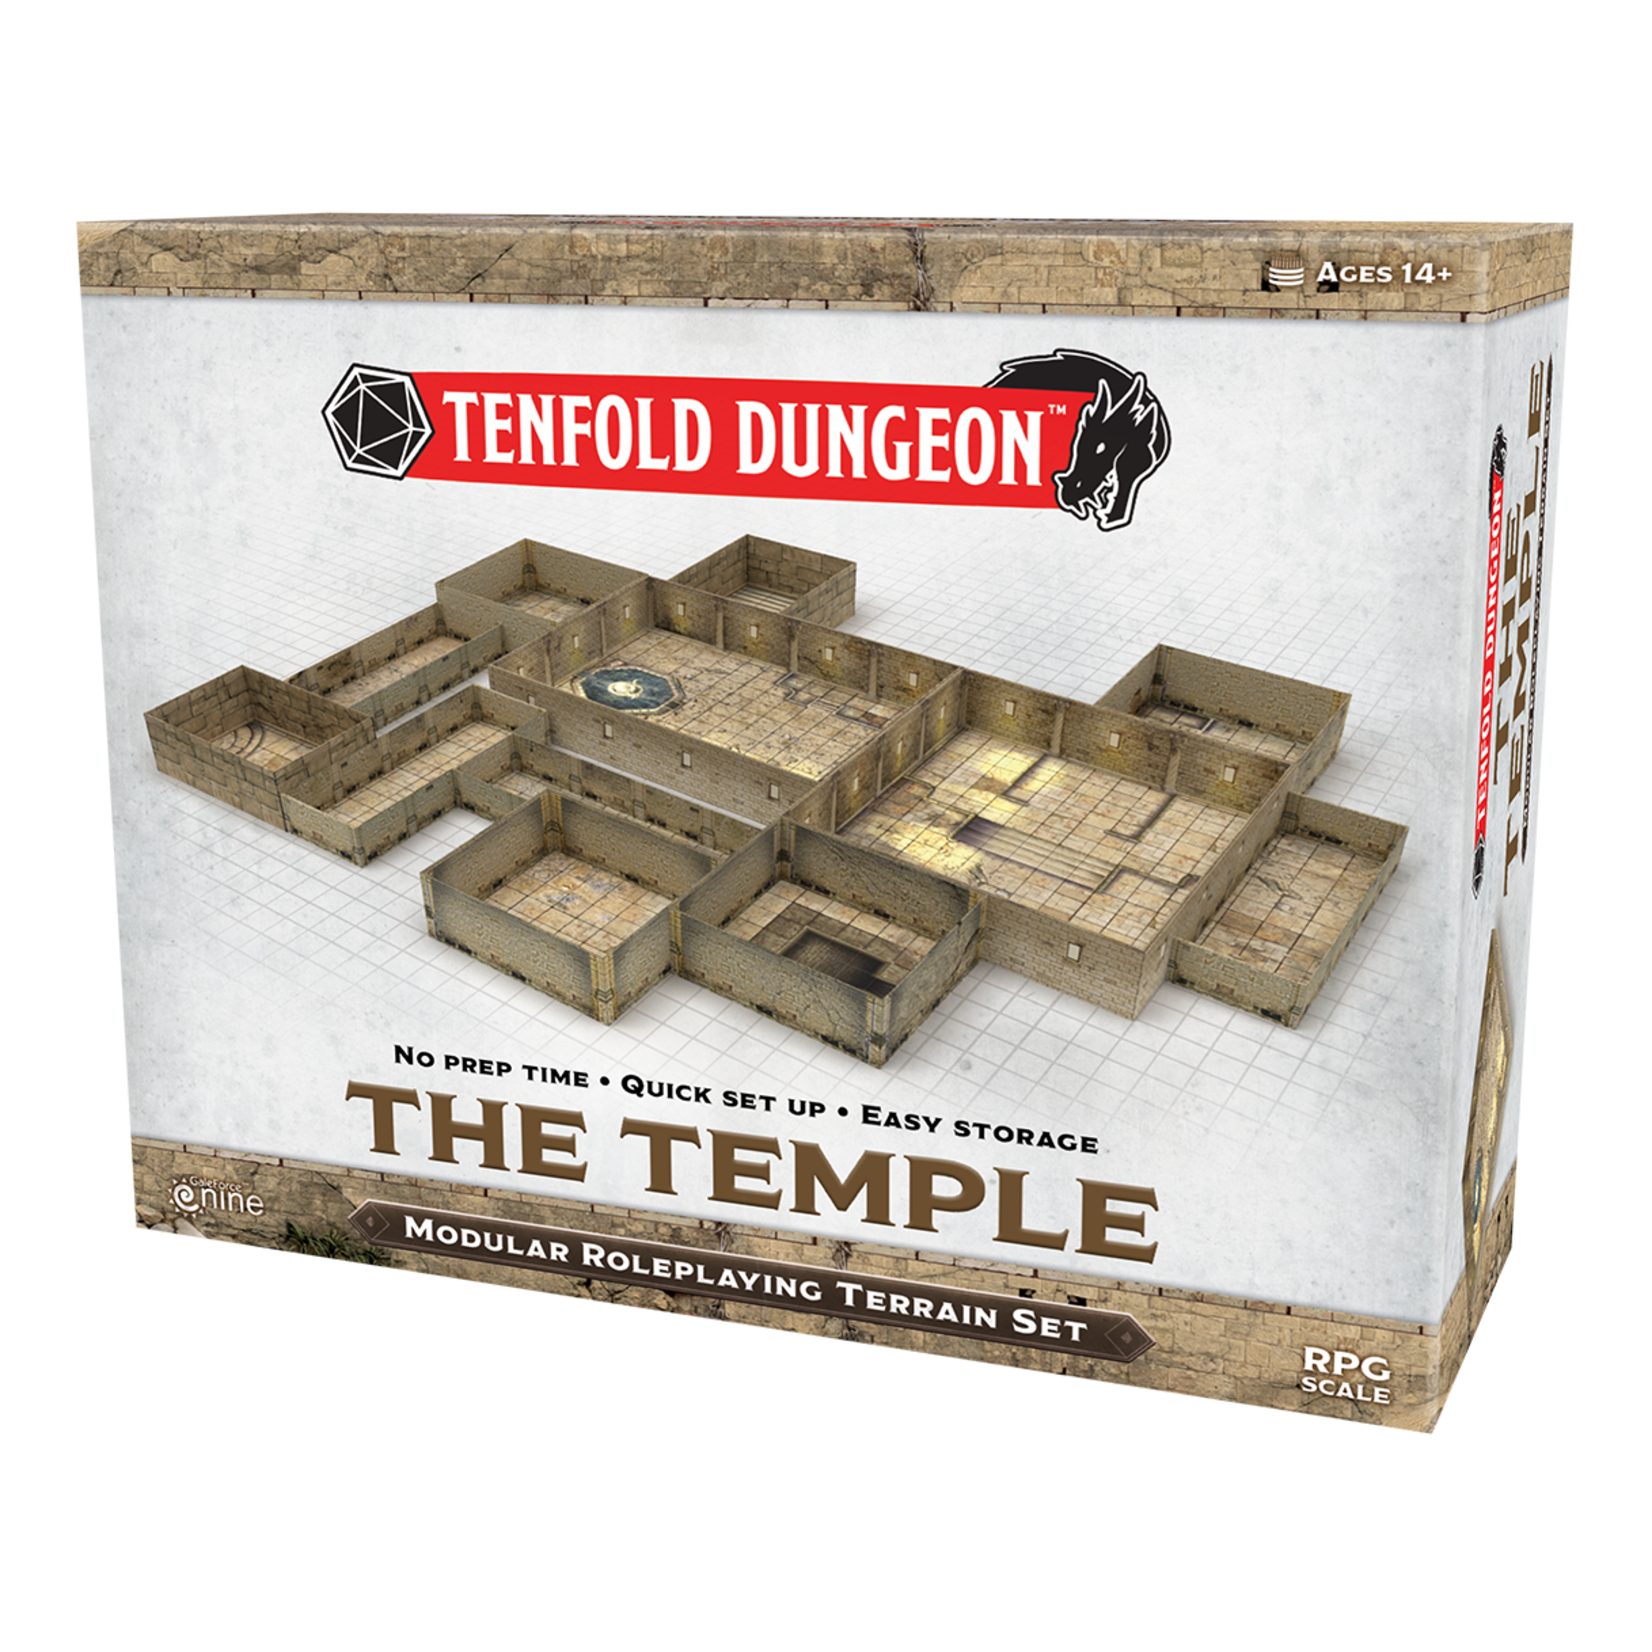 Gale Force Nine GF9: Tenfold Dungeon: Temple